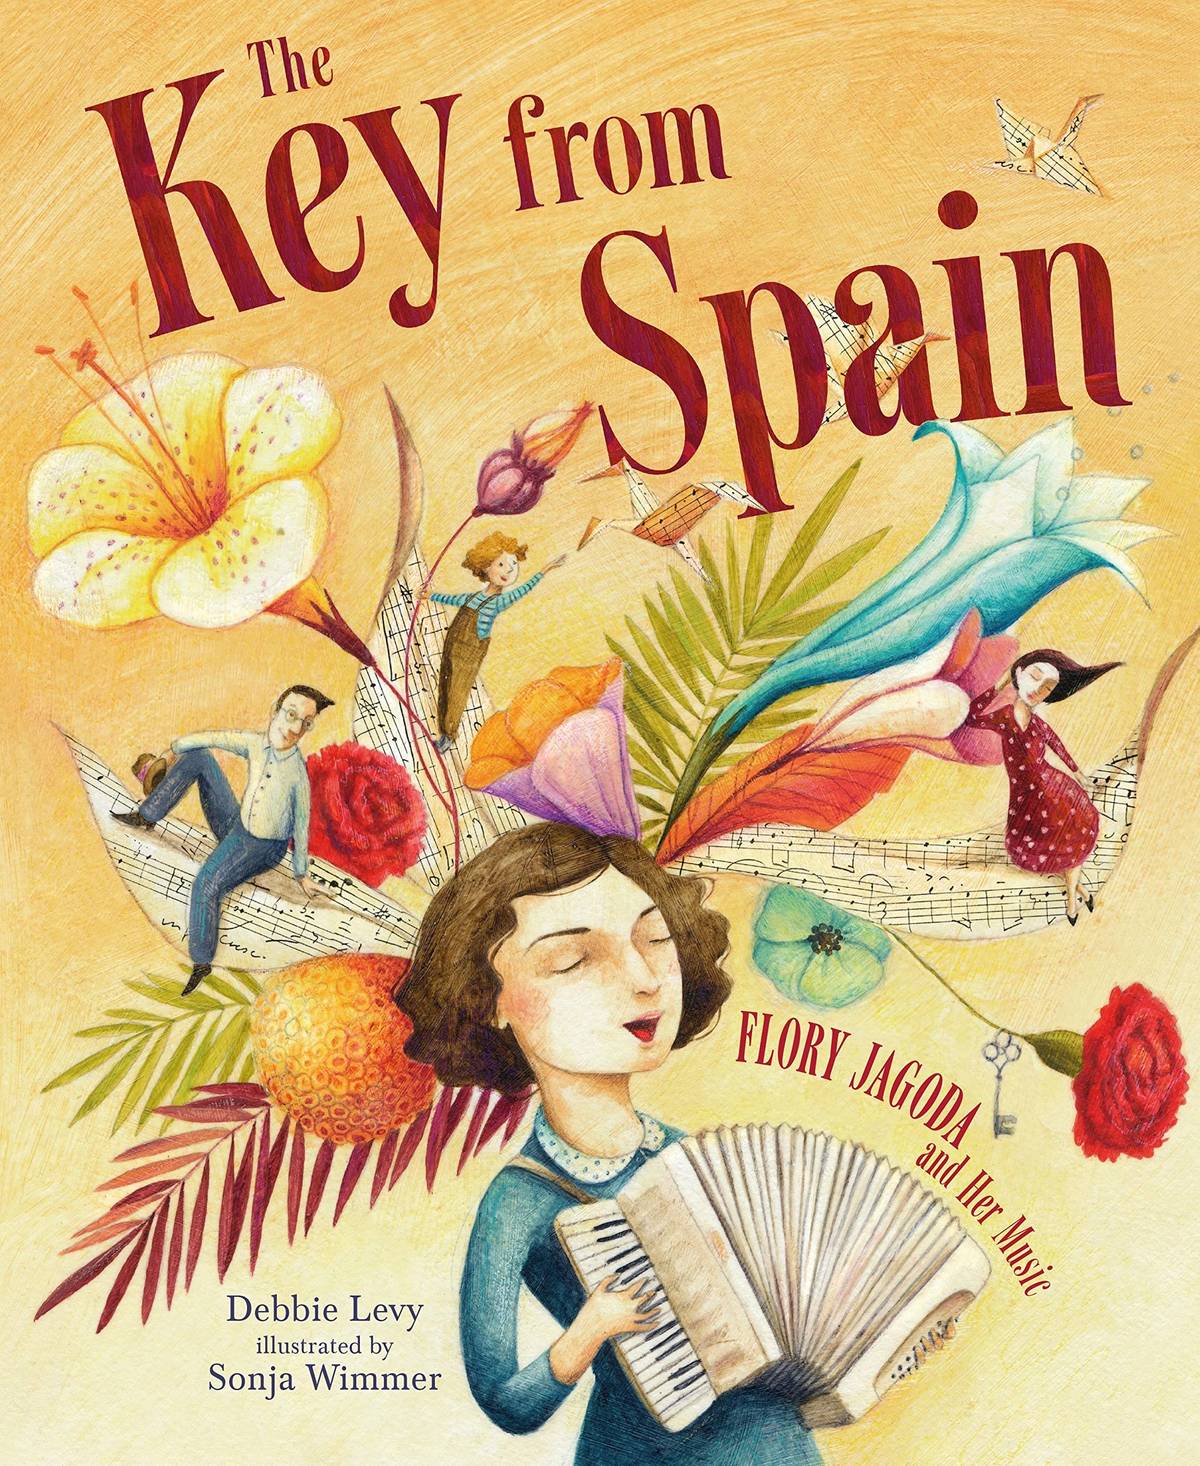 ‘The Key from Spain,’ by Debbie Levy, illustrated by Sonja Wimmer (Published by Kar-Ben)